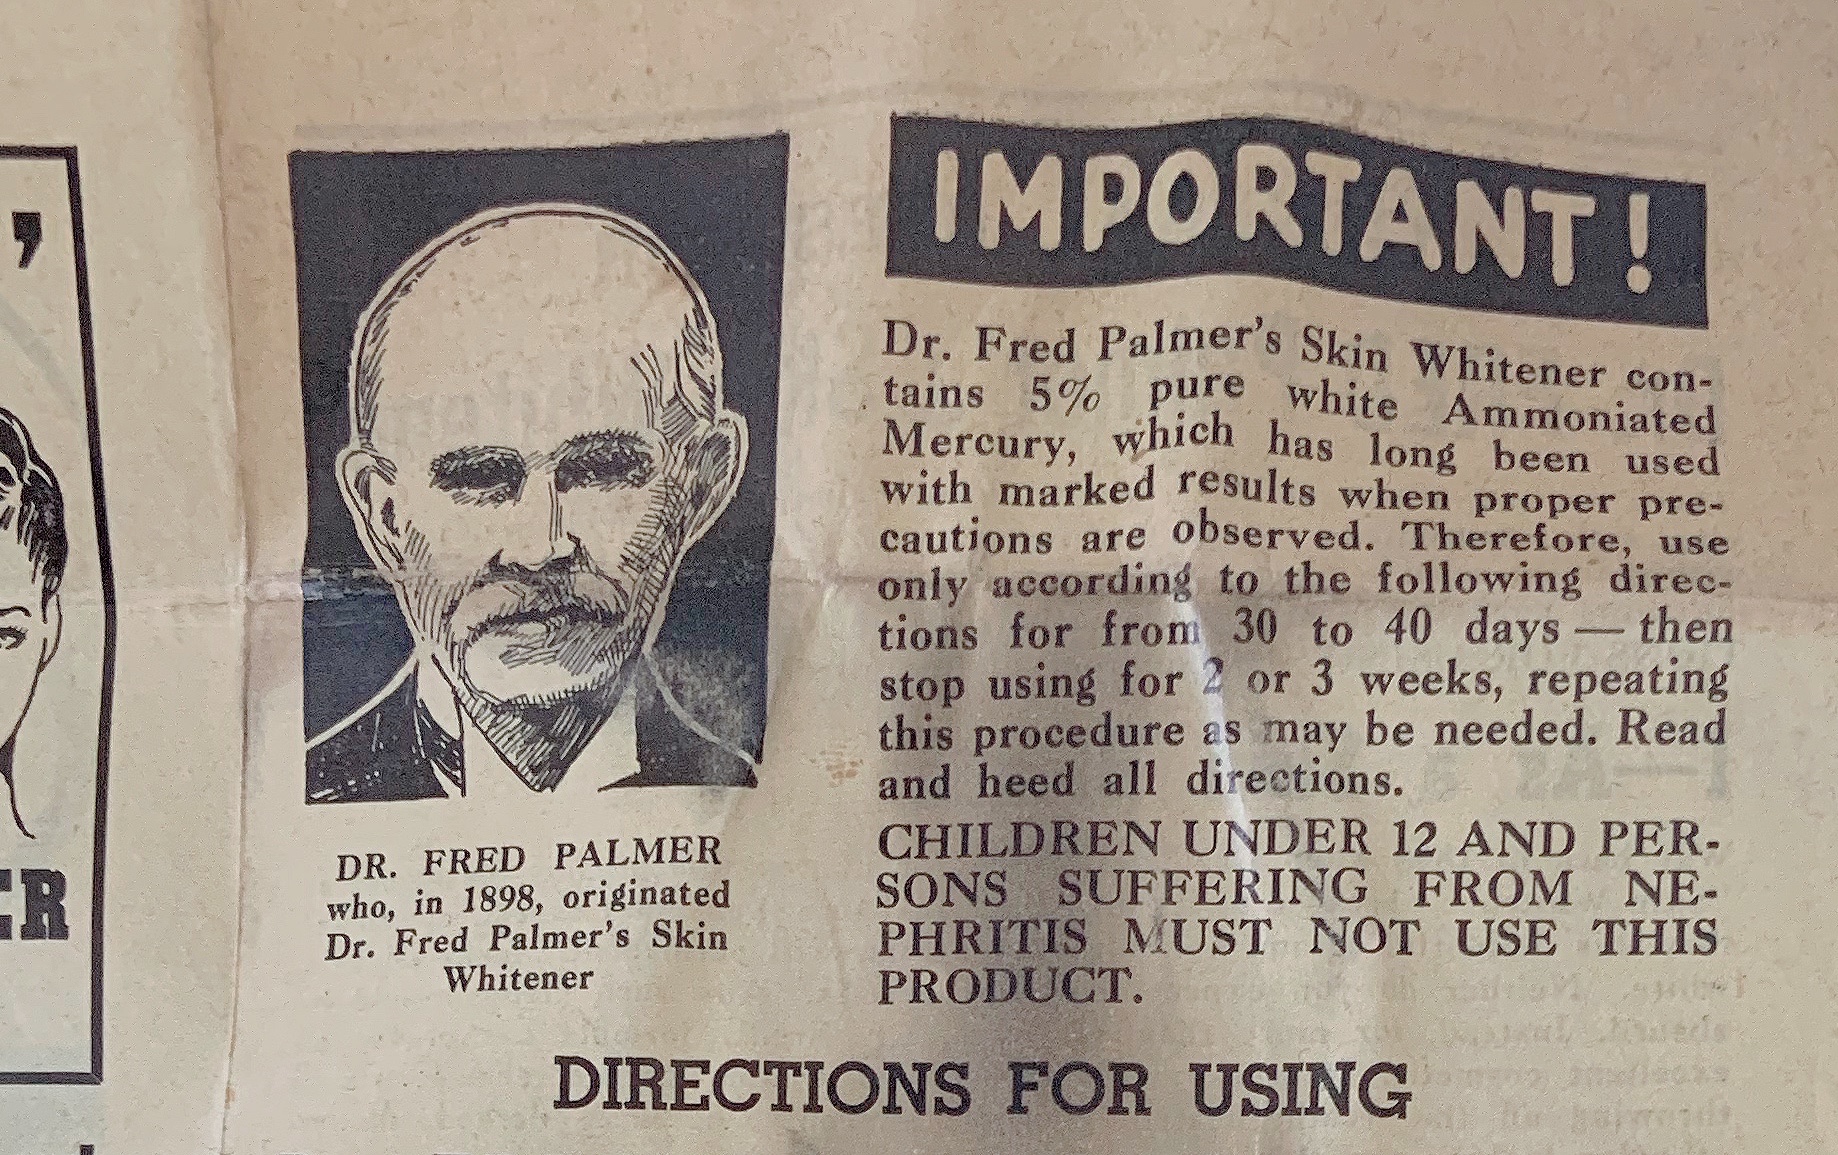 The History of Dr. Fred Palmer’s Skin Whitener